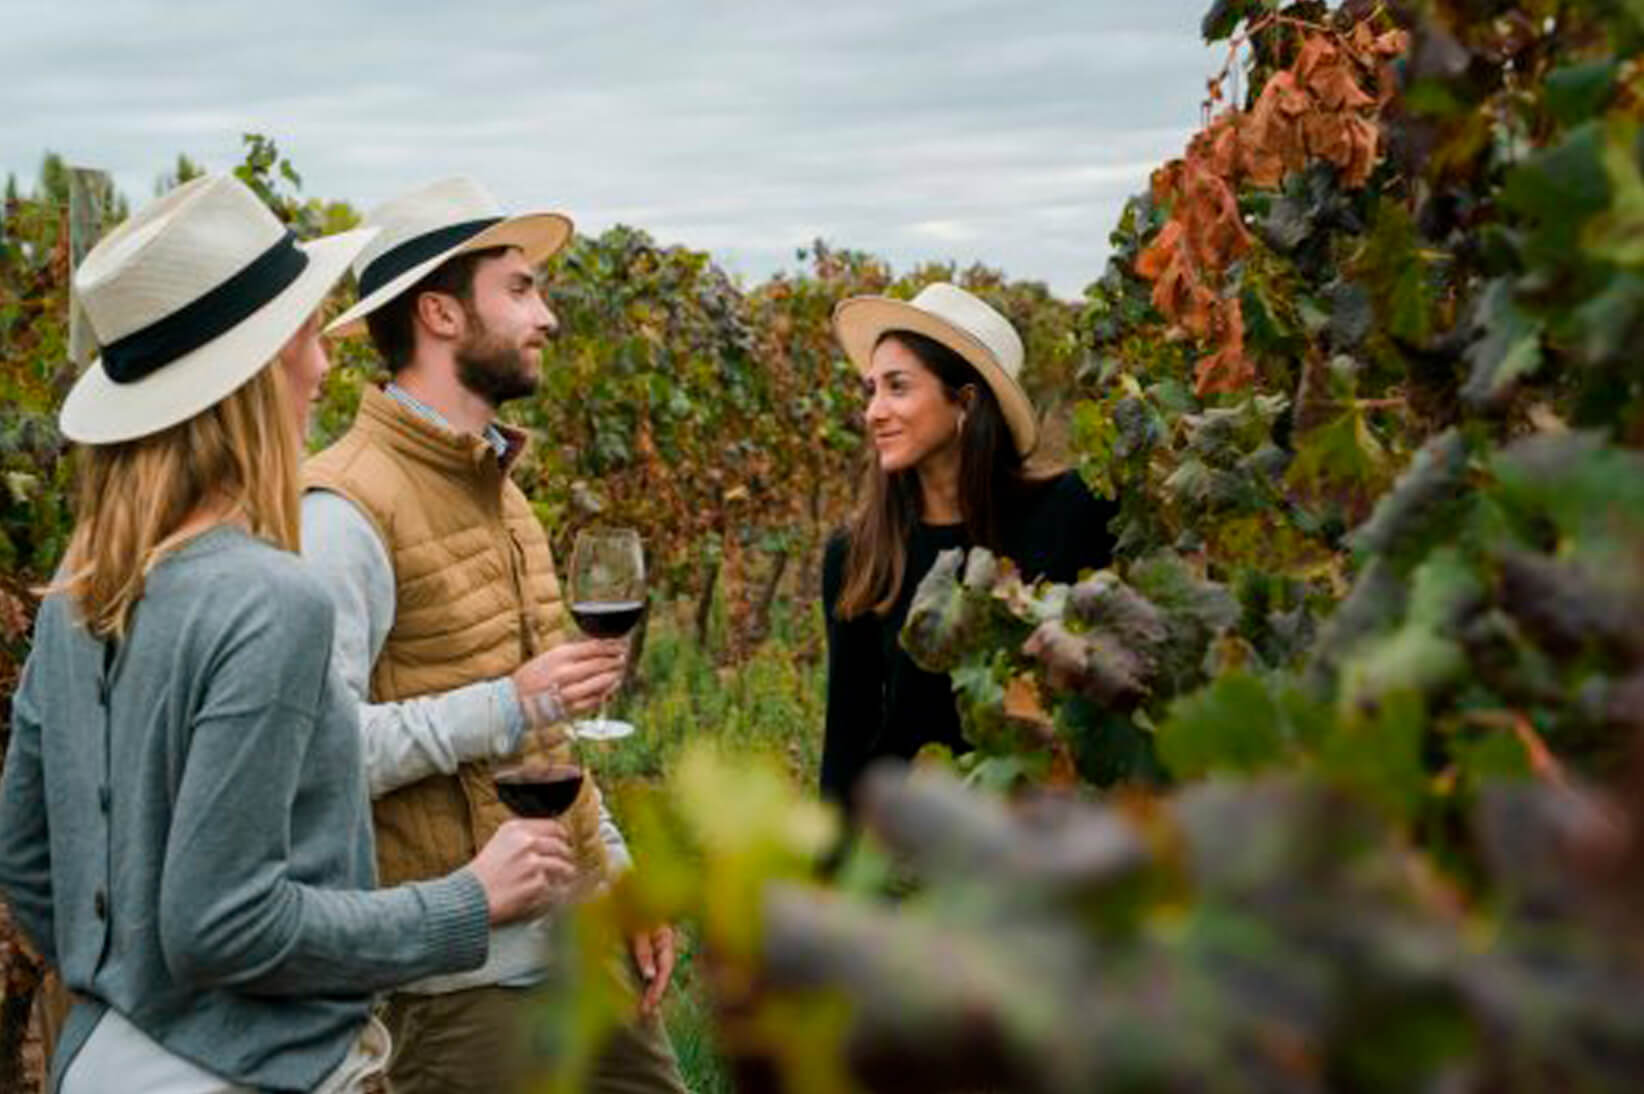 Wineries in Mendoza choose sustainability